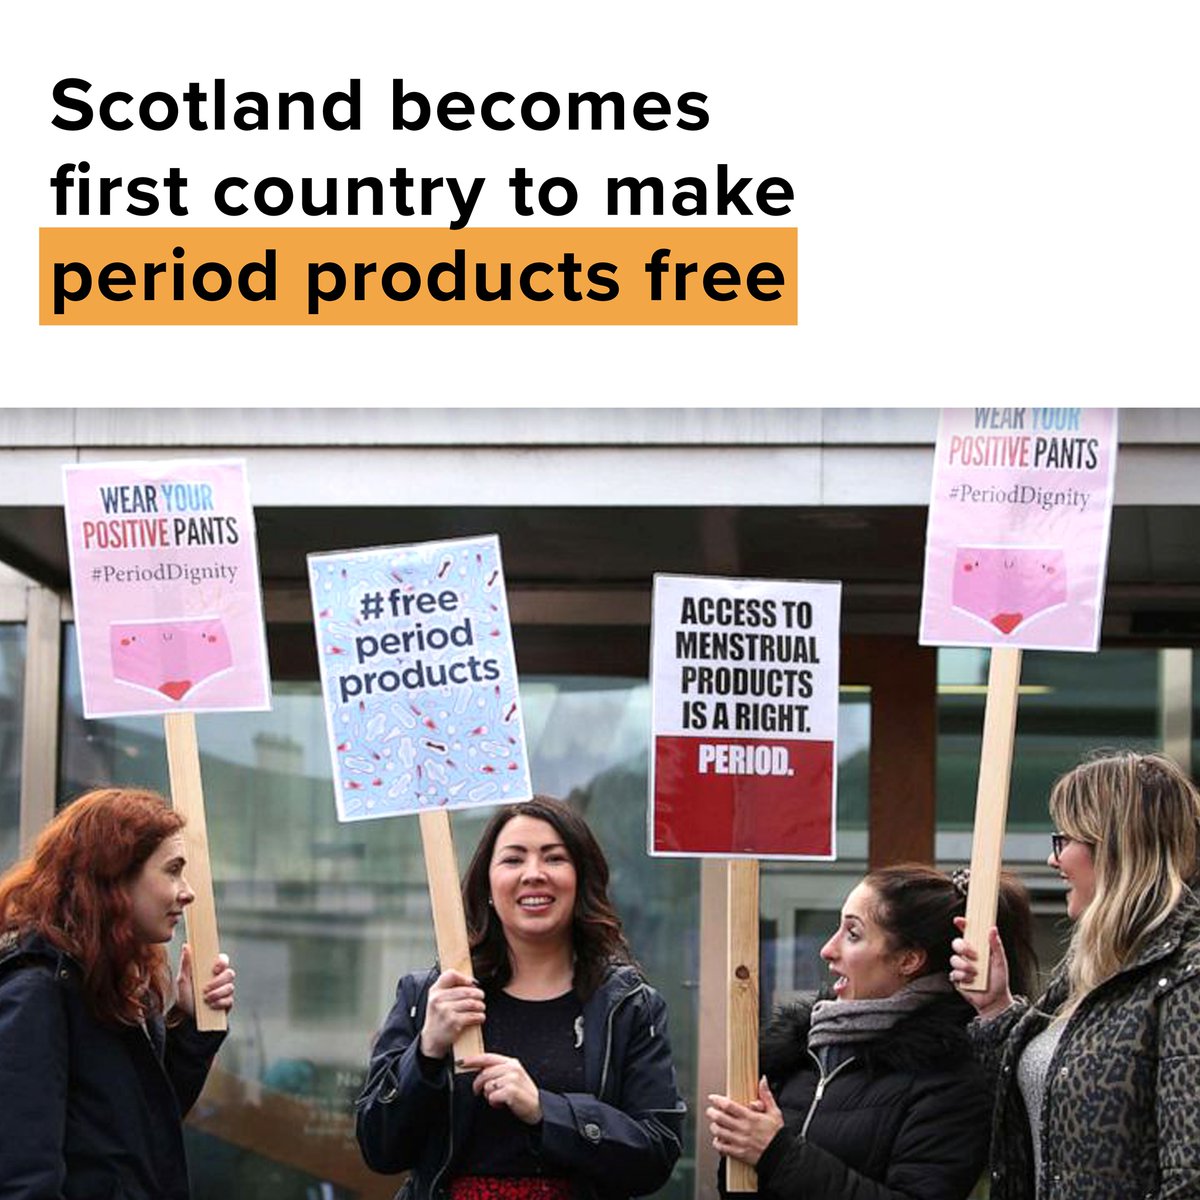 Menstrual health is a basic right! 🍷

Scotland becomes the first country to make period products free after lawmakers unanimously passed the bill.

#menstrualhealth #periodcare #freeperiod #periodrights #periodpositive #mhm #menstrualequity